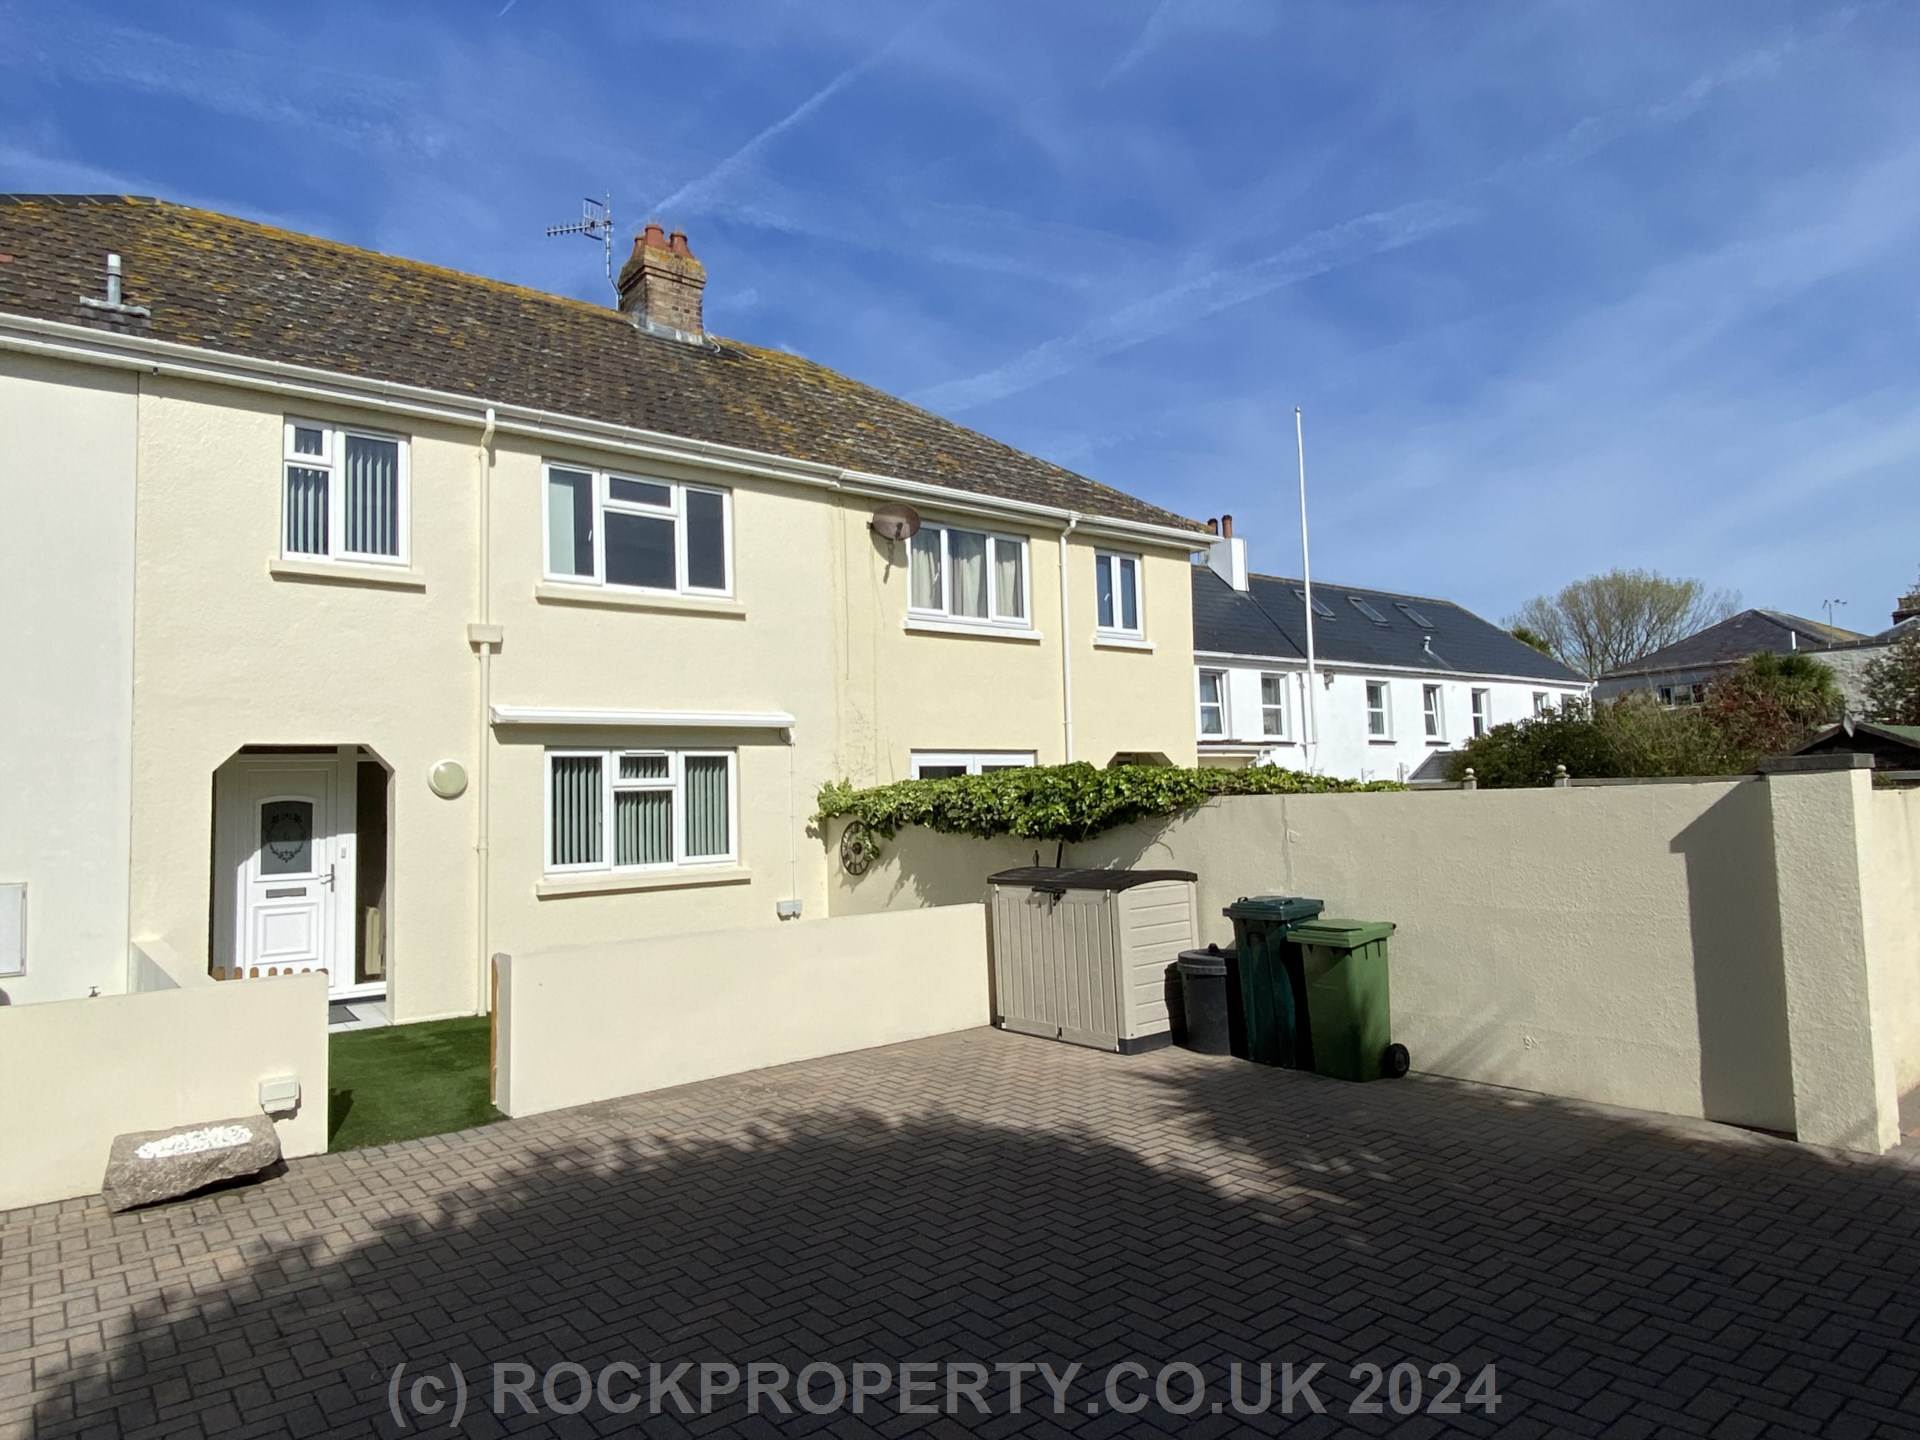 OFFERS INVITED - LOVELY 3 BED 2 BATH, Quiet cul-de-sac, St Saviour, Image 22